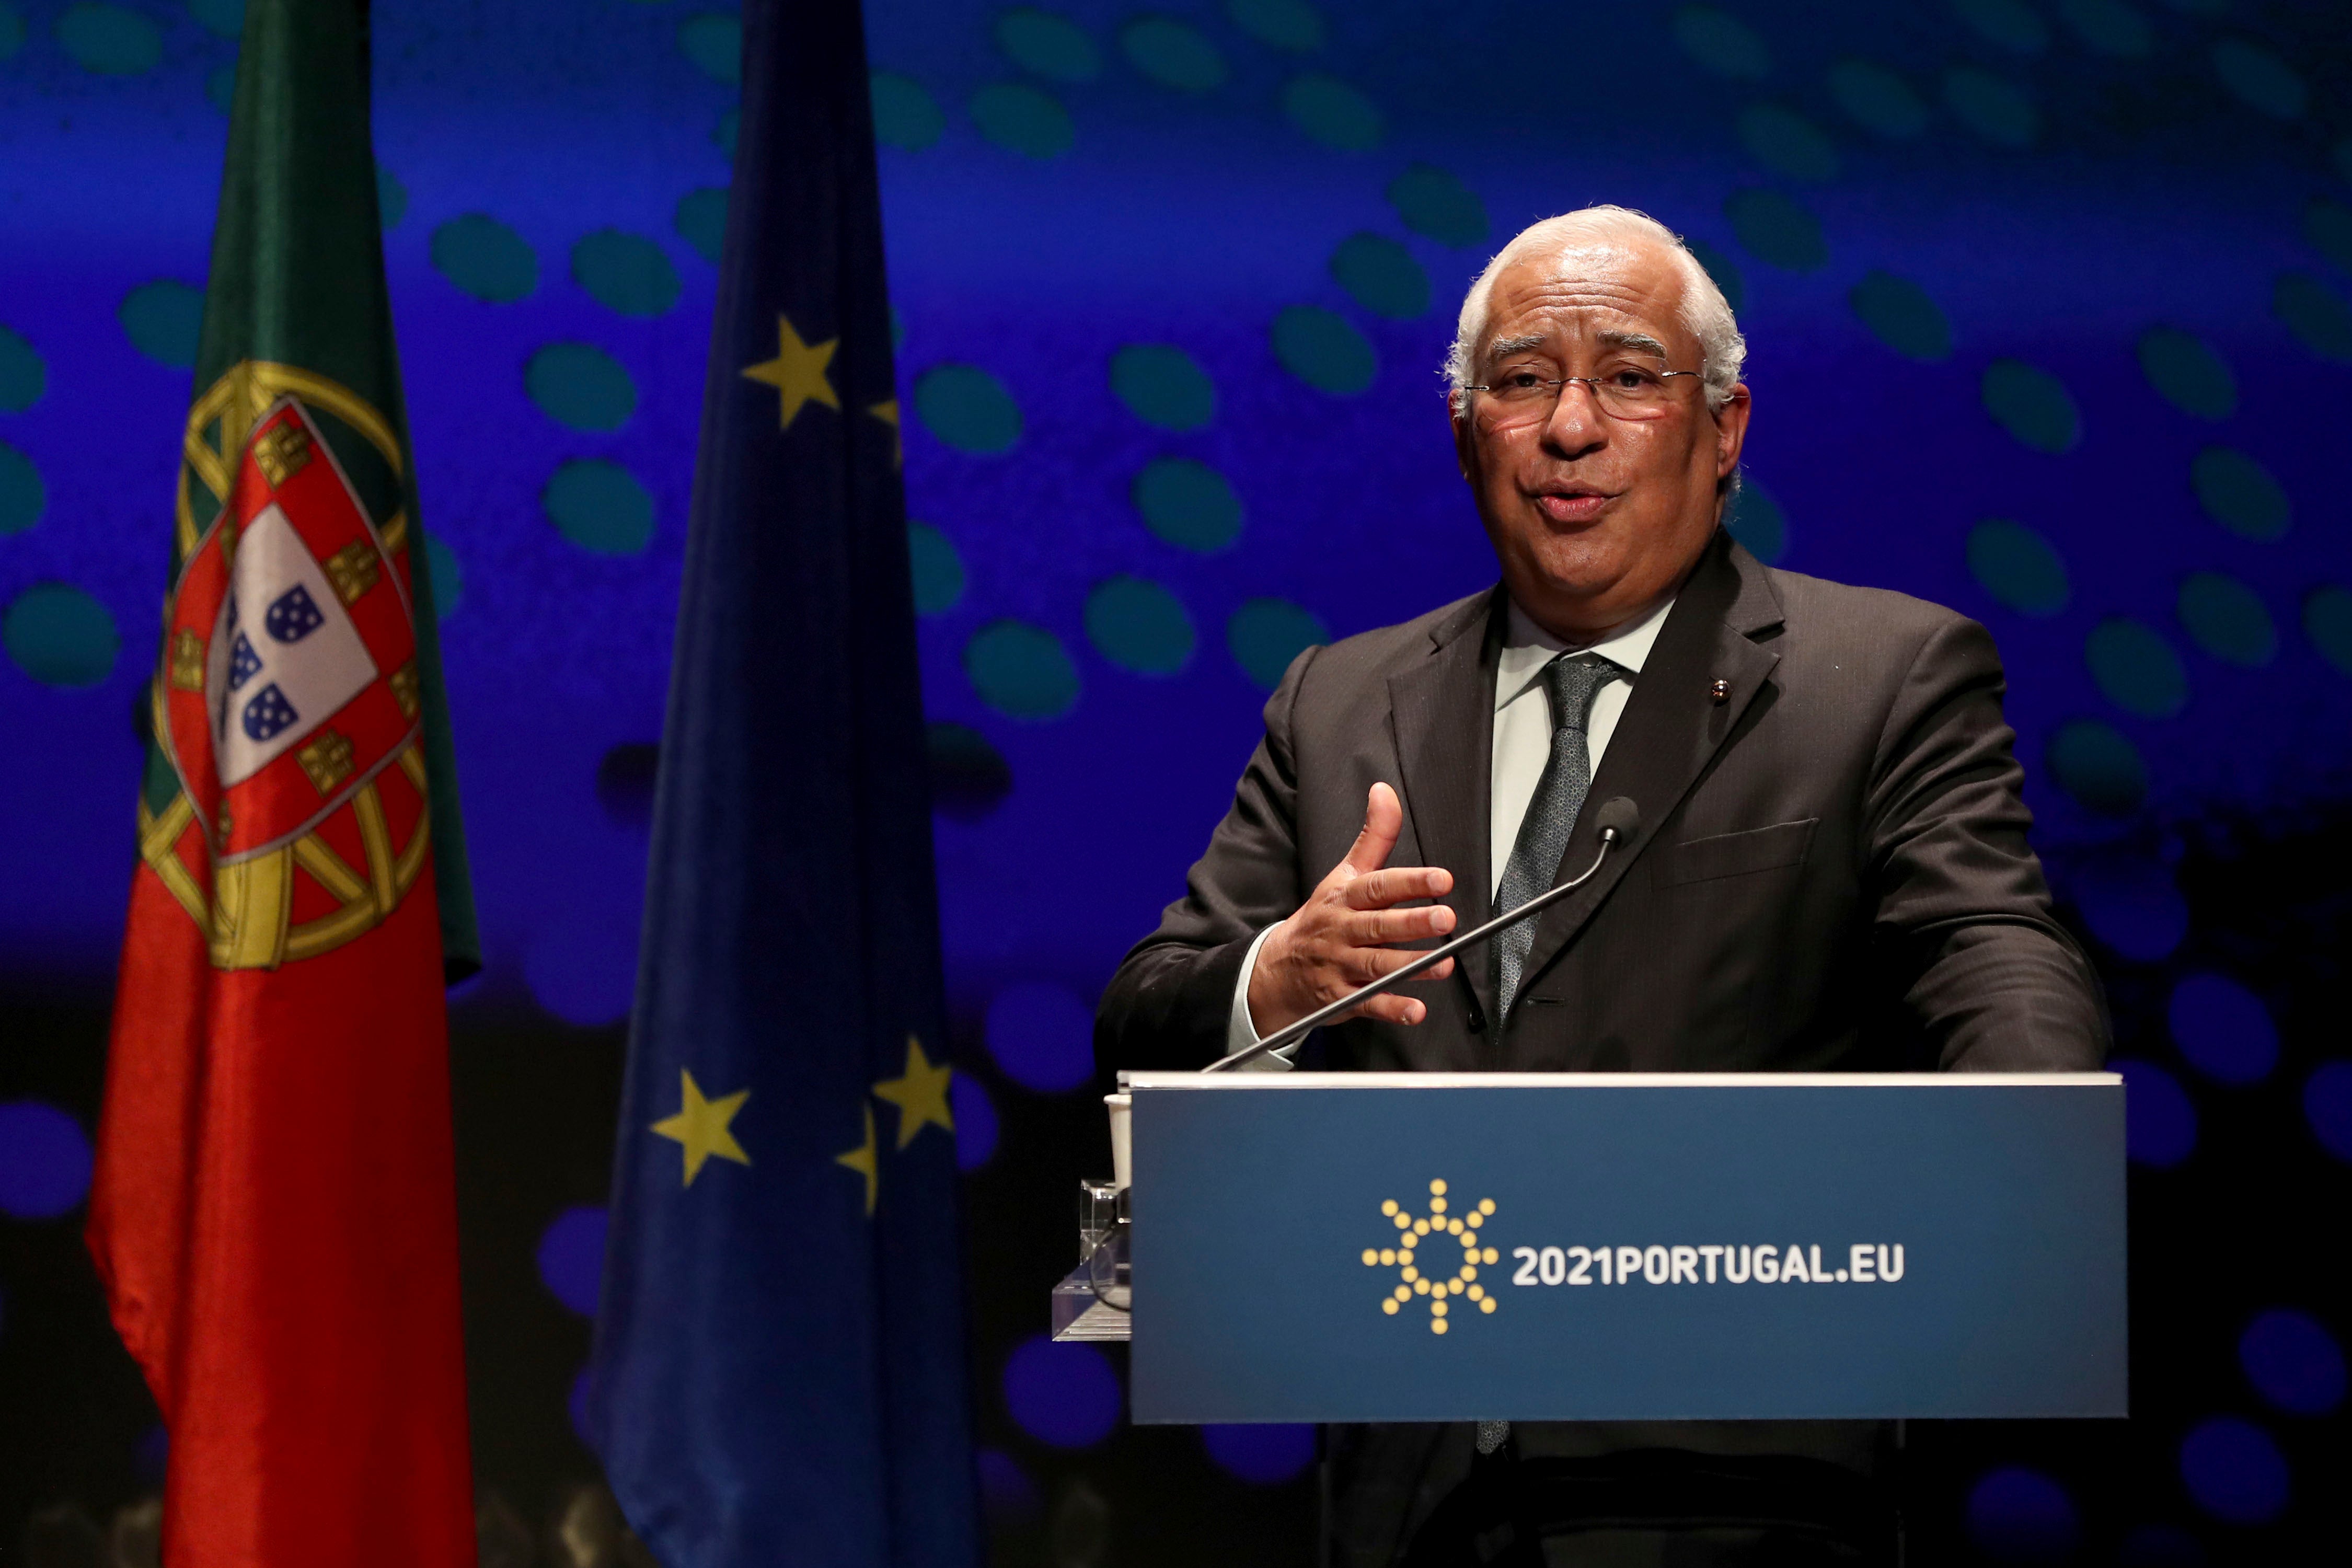 Portugal Prime Minister Antonio Costa at a press conference at the Belem Cultural Center in Lisbon, Friday, January 15, 2021.